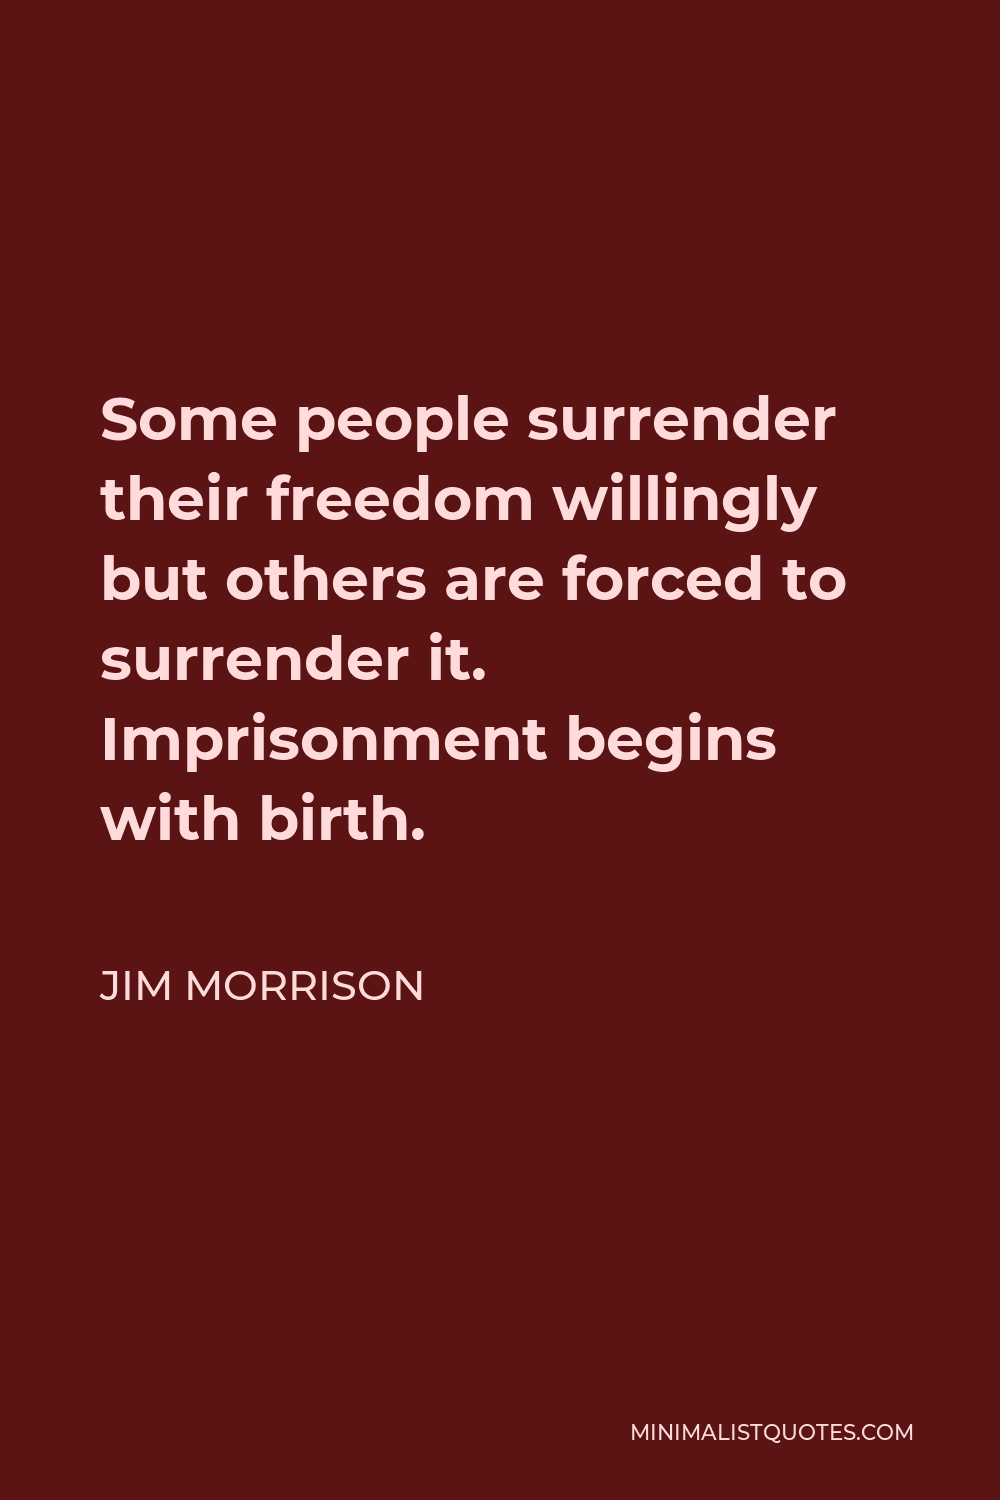 Jim Morrison Quote - Some people surrender their freedom willingly but others are forced to surrender it. Imprisonment begins with birth.